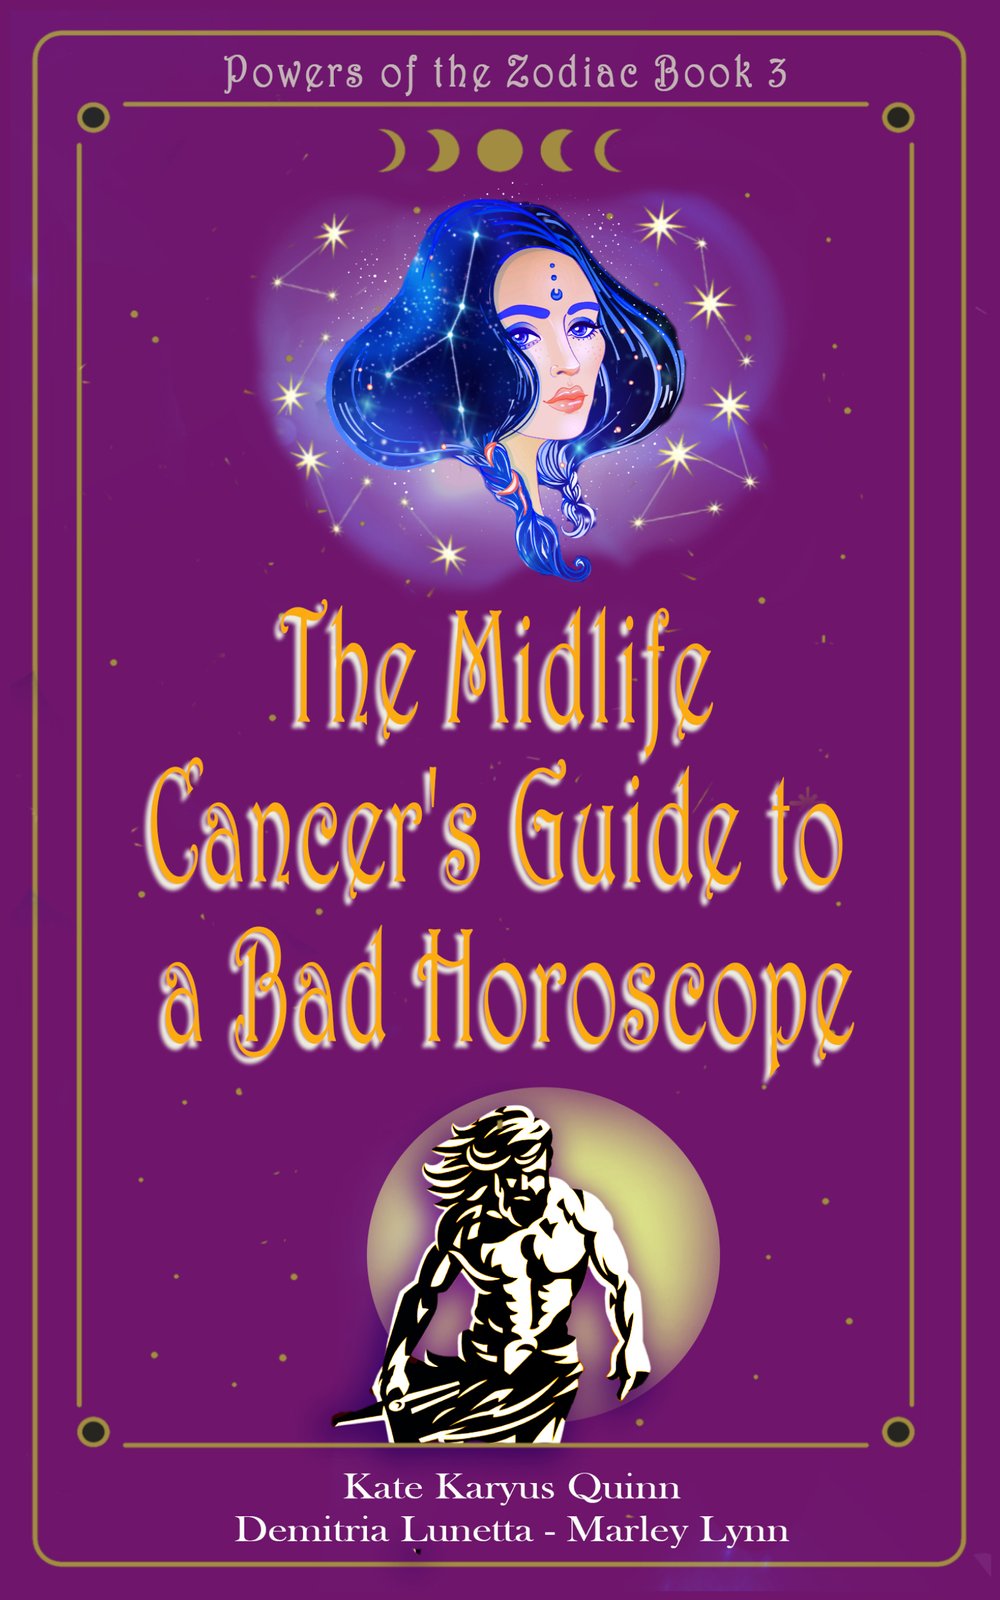 The Midlife Cancer's Guide to a Bad Horoscope